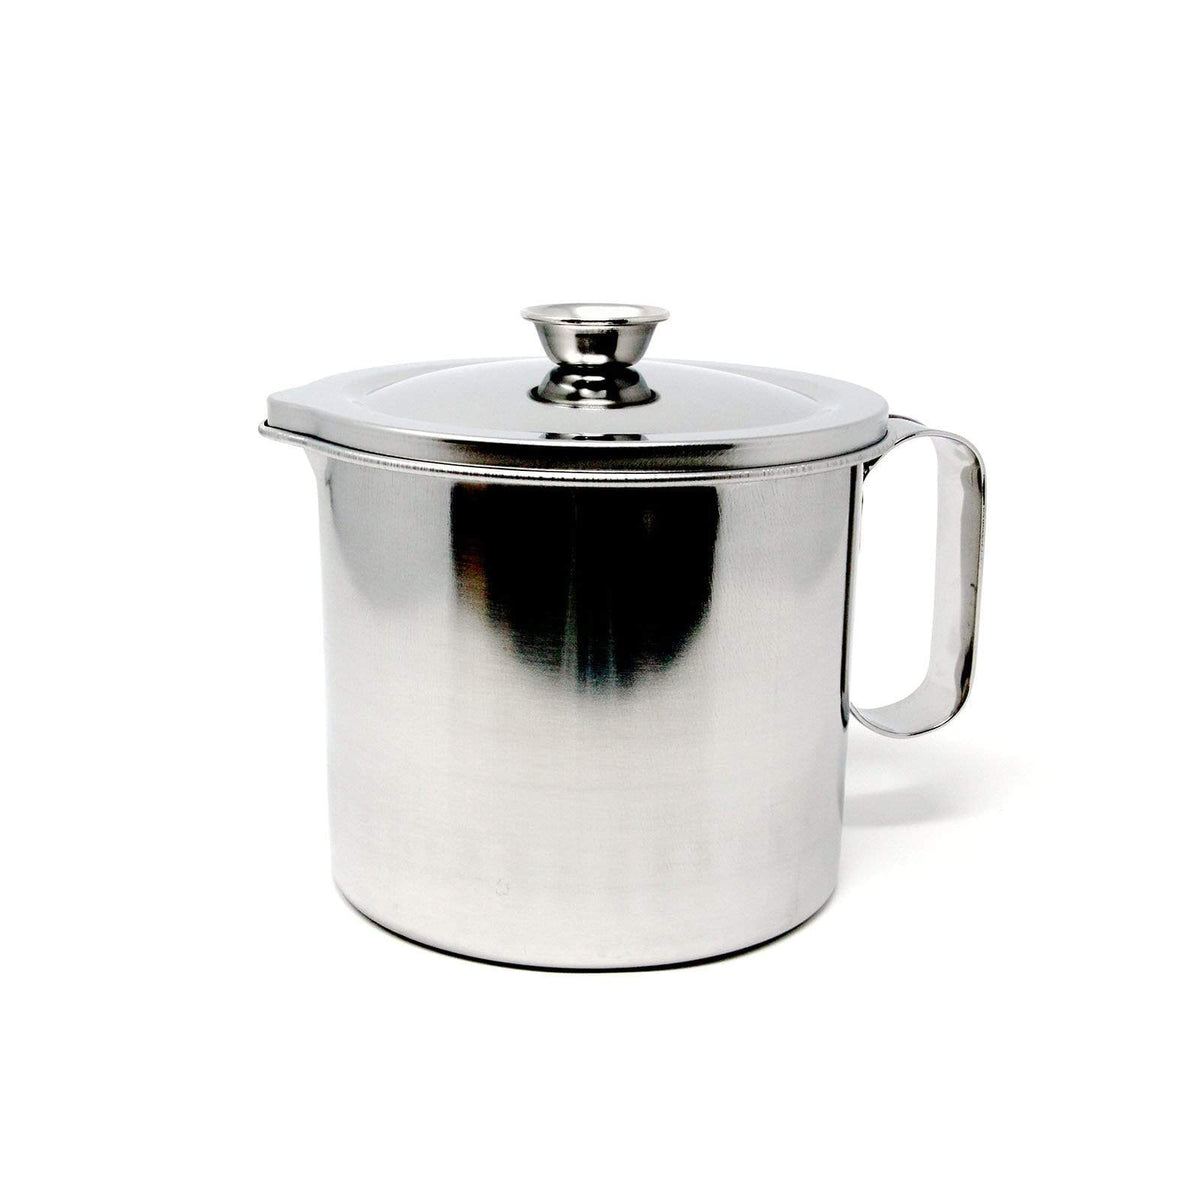 Ichibishi Stainless Steel CooKing Oil Keeper with Double-Filter Strainer 1.2L Oil Storage Containers